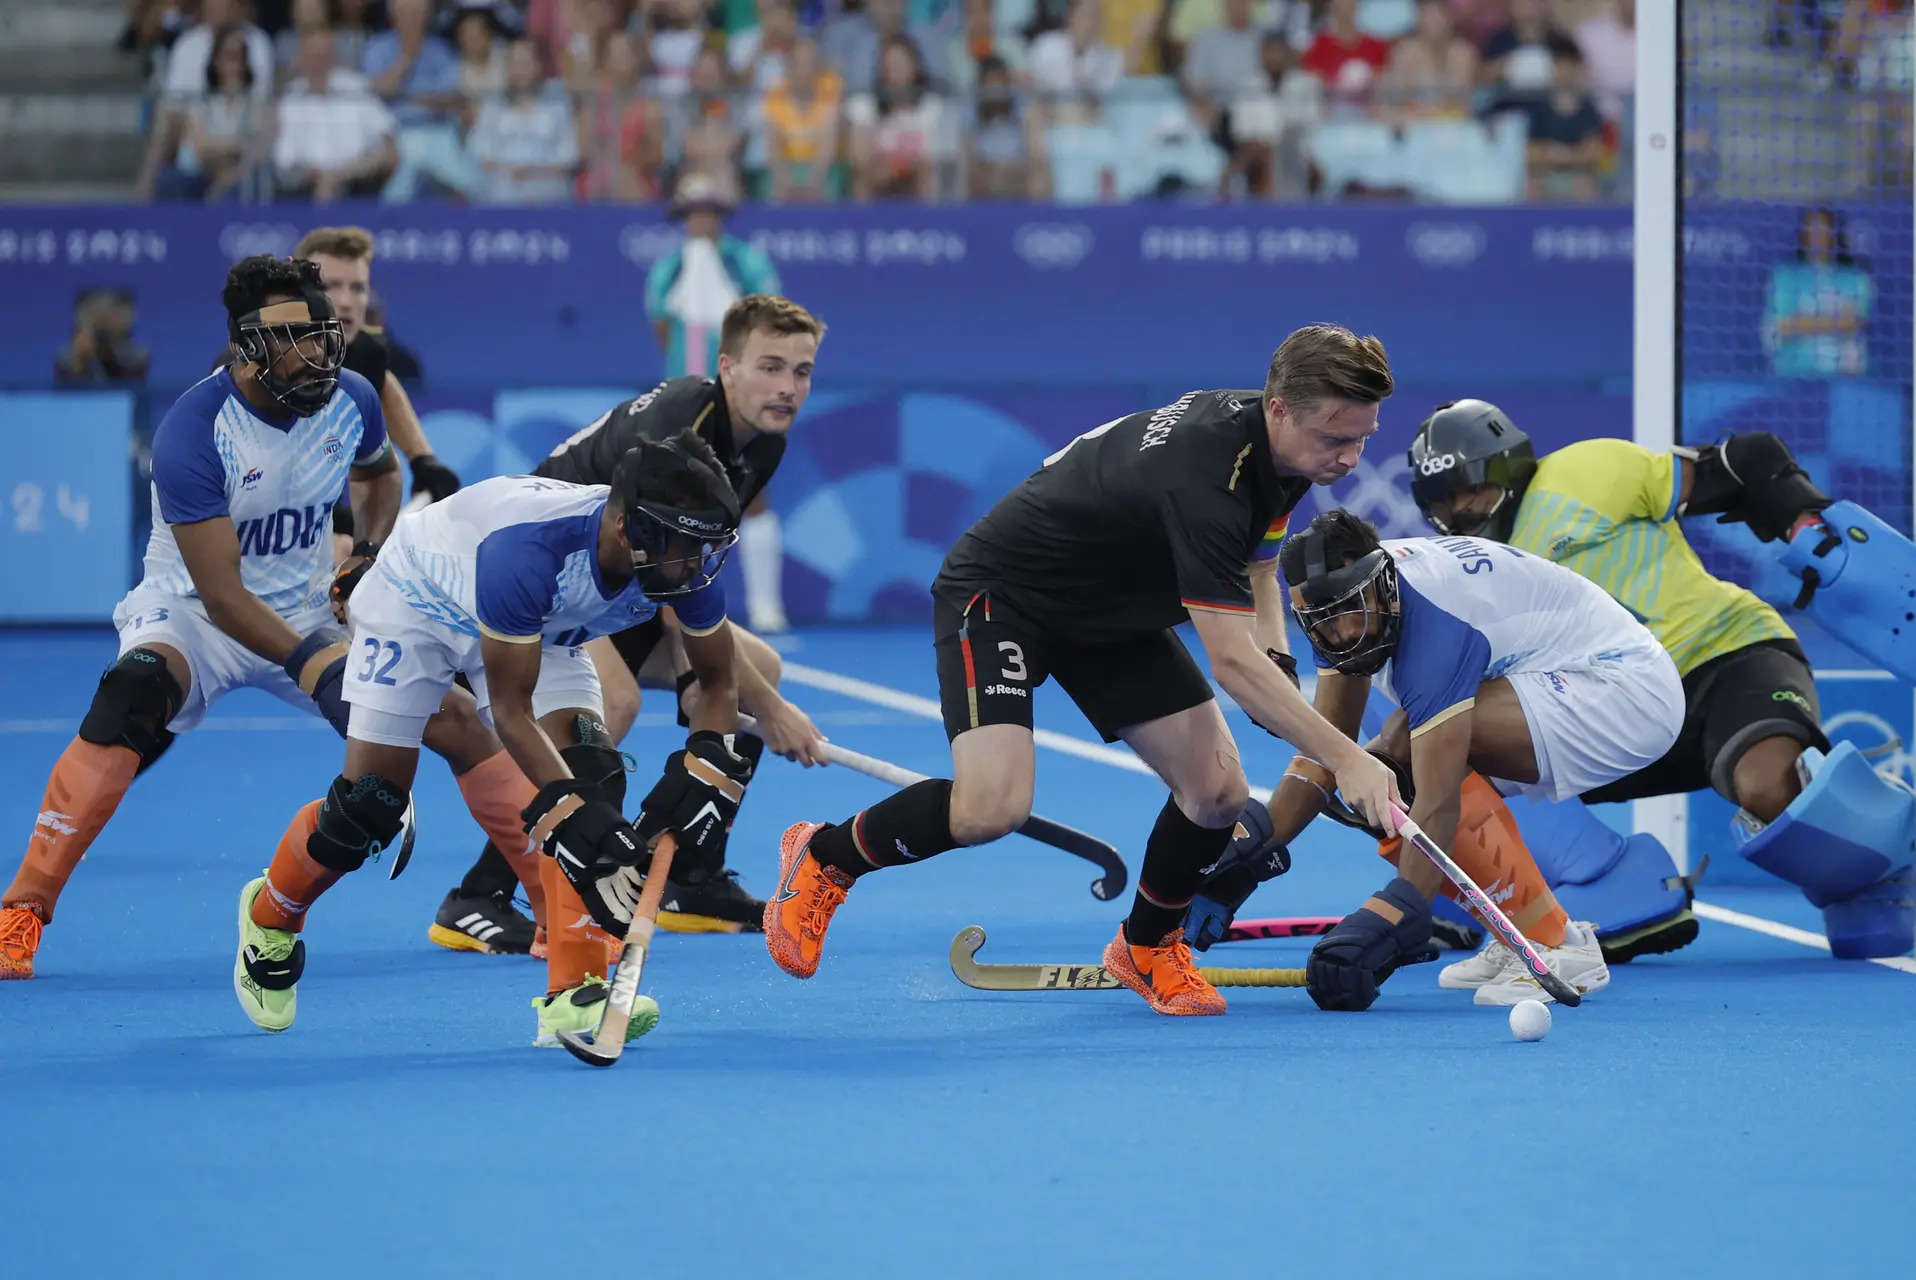 Paris Olympics: Germany beat India 3-2 in penultimate hockey match to progress to final 